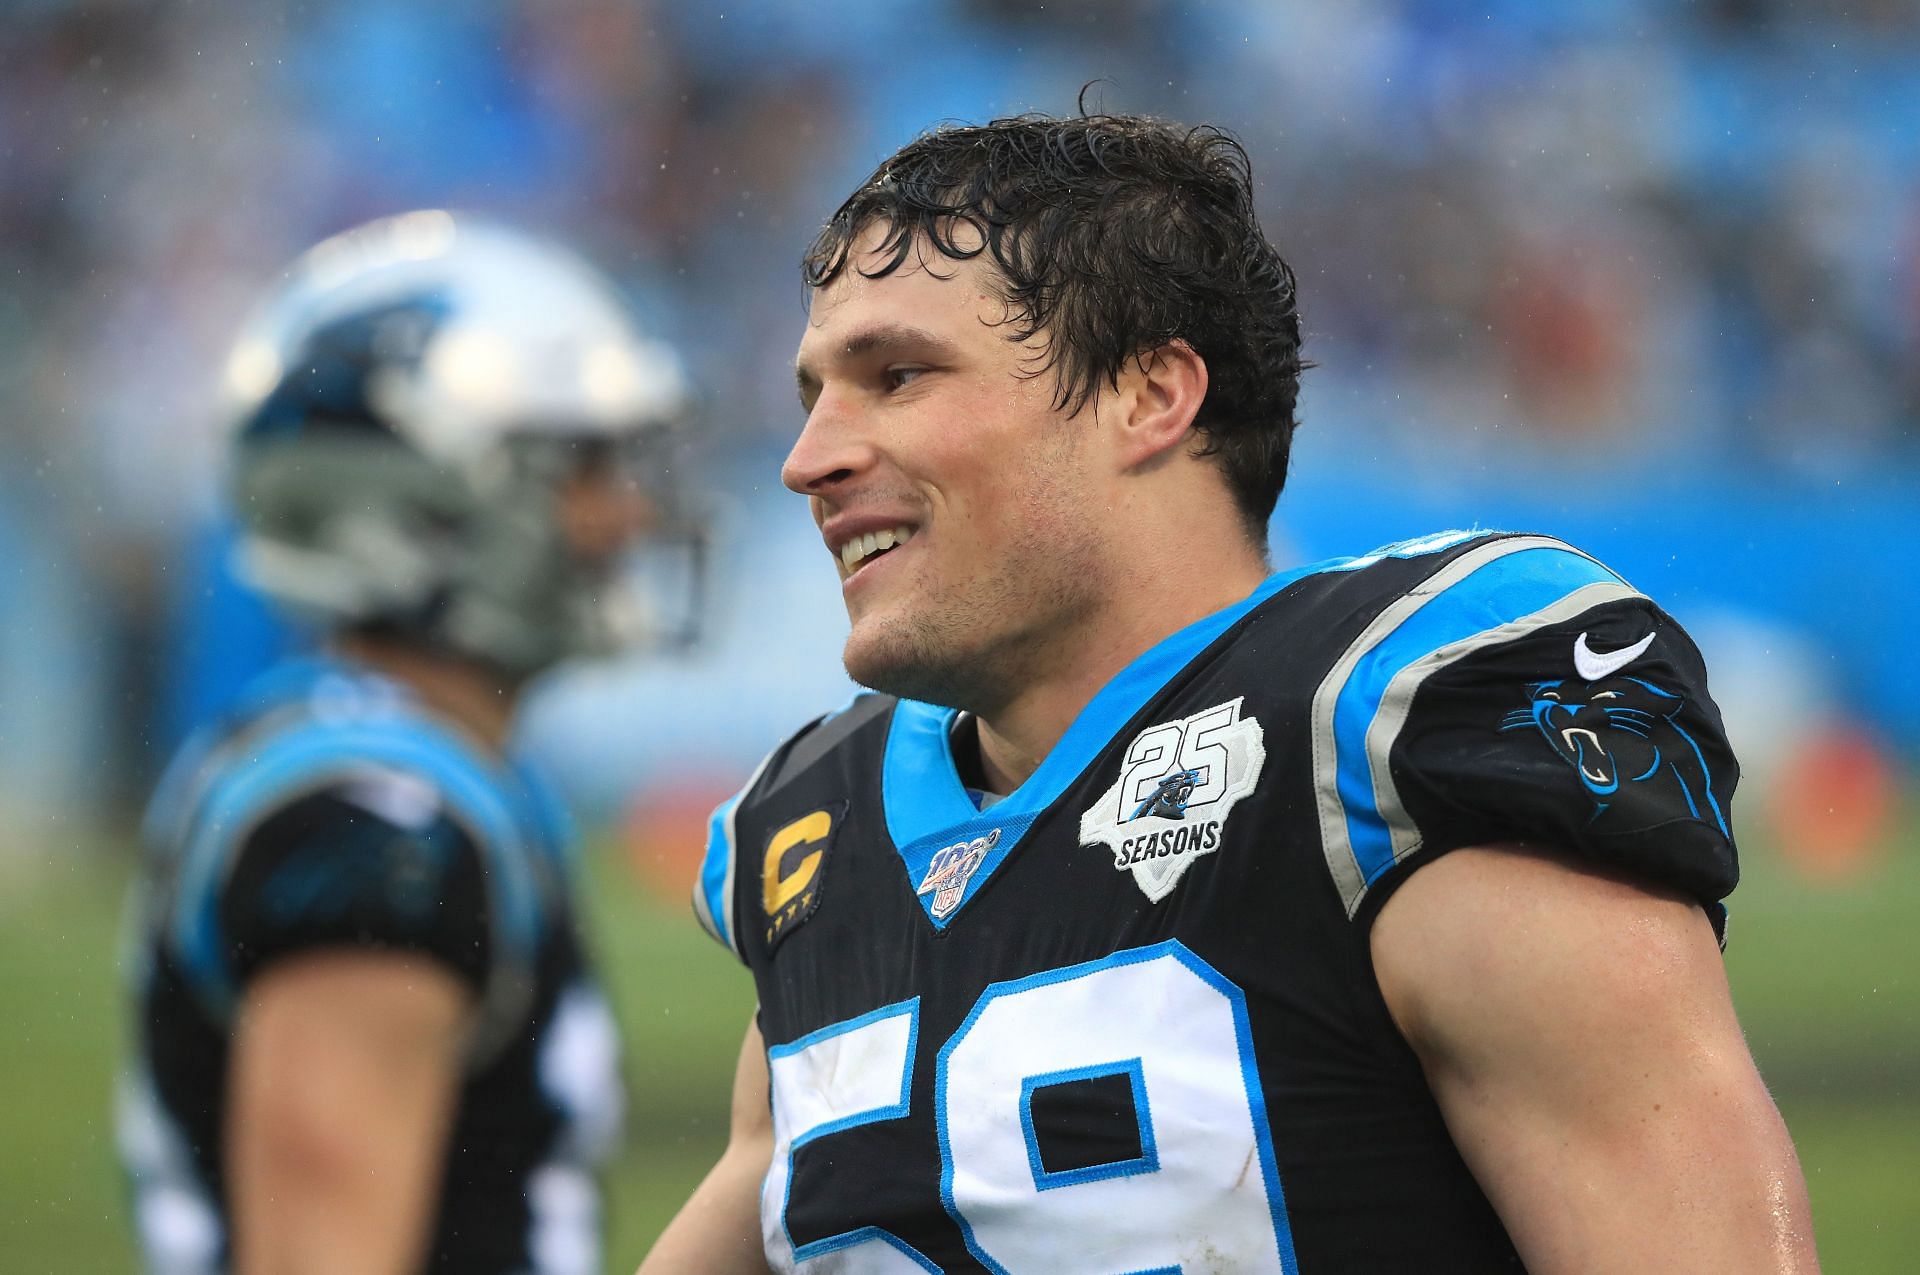 Kuechly is the only defensive player on the list